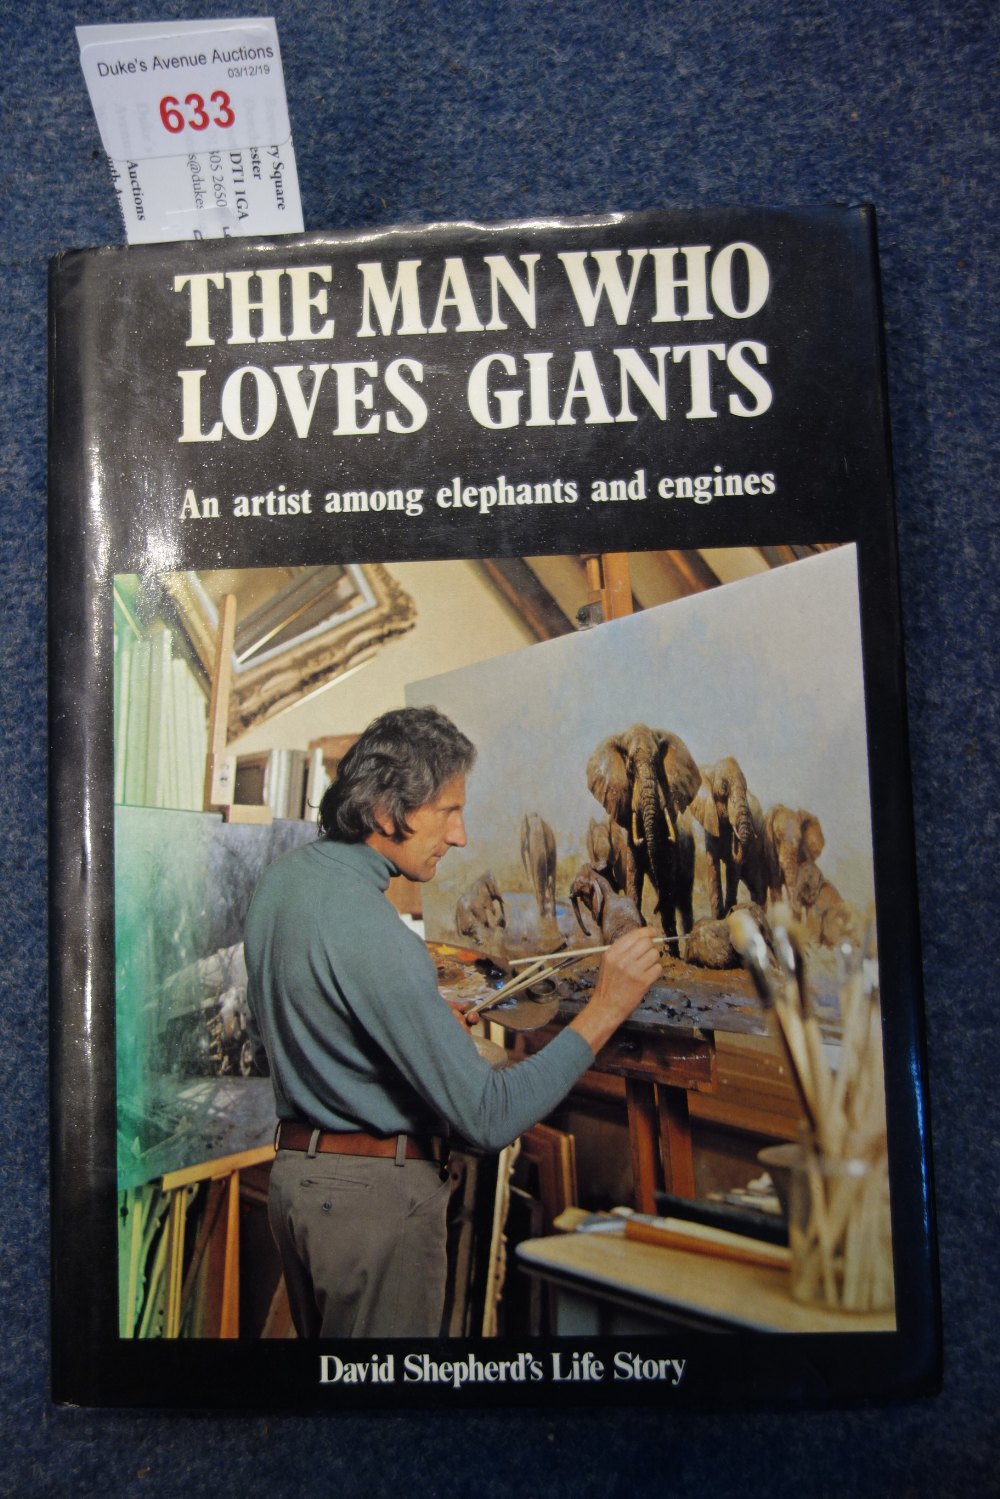 DAVID SHEPHERD: "The Man who loves Giants", signed by the author, fifth impression 1983